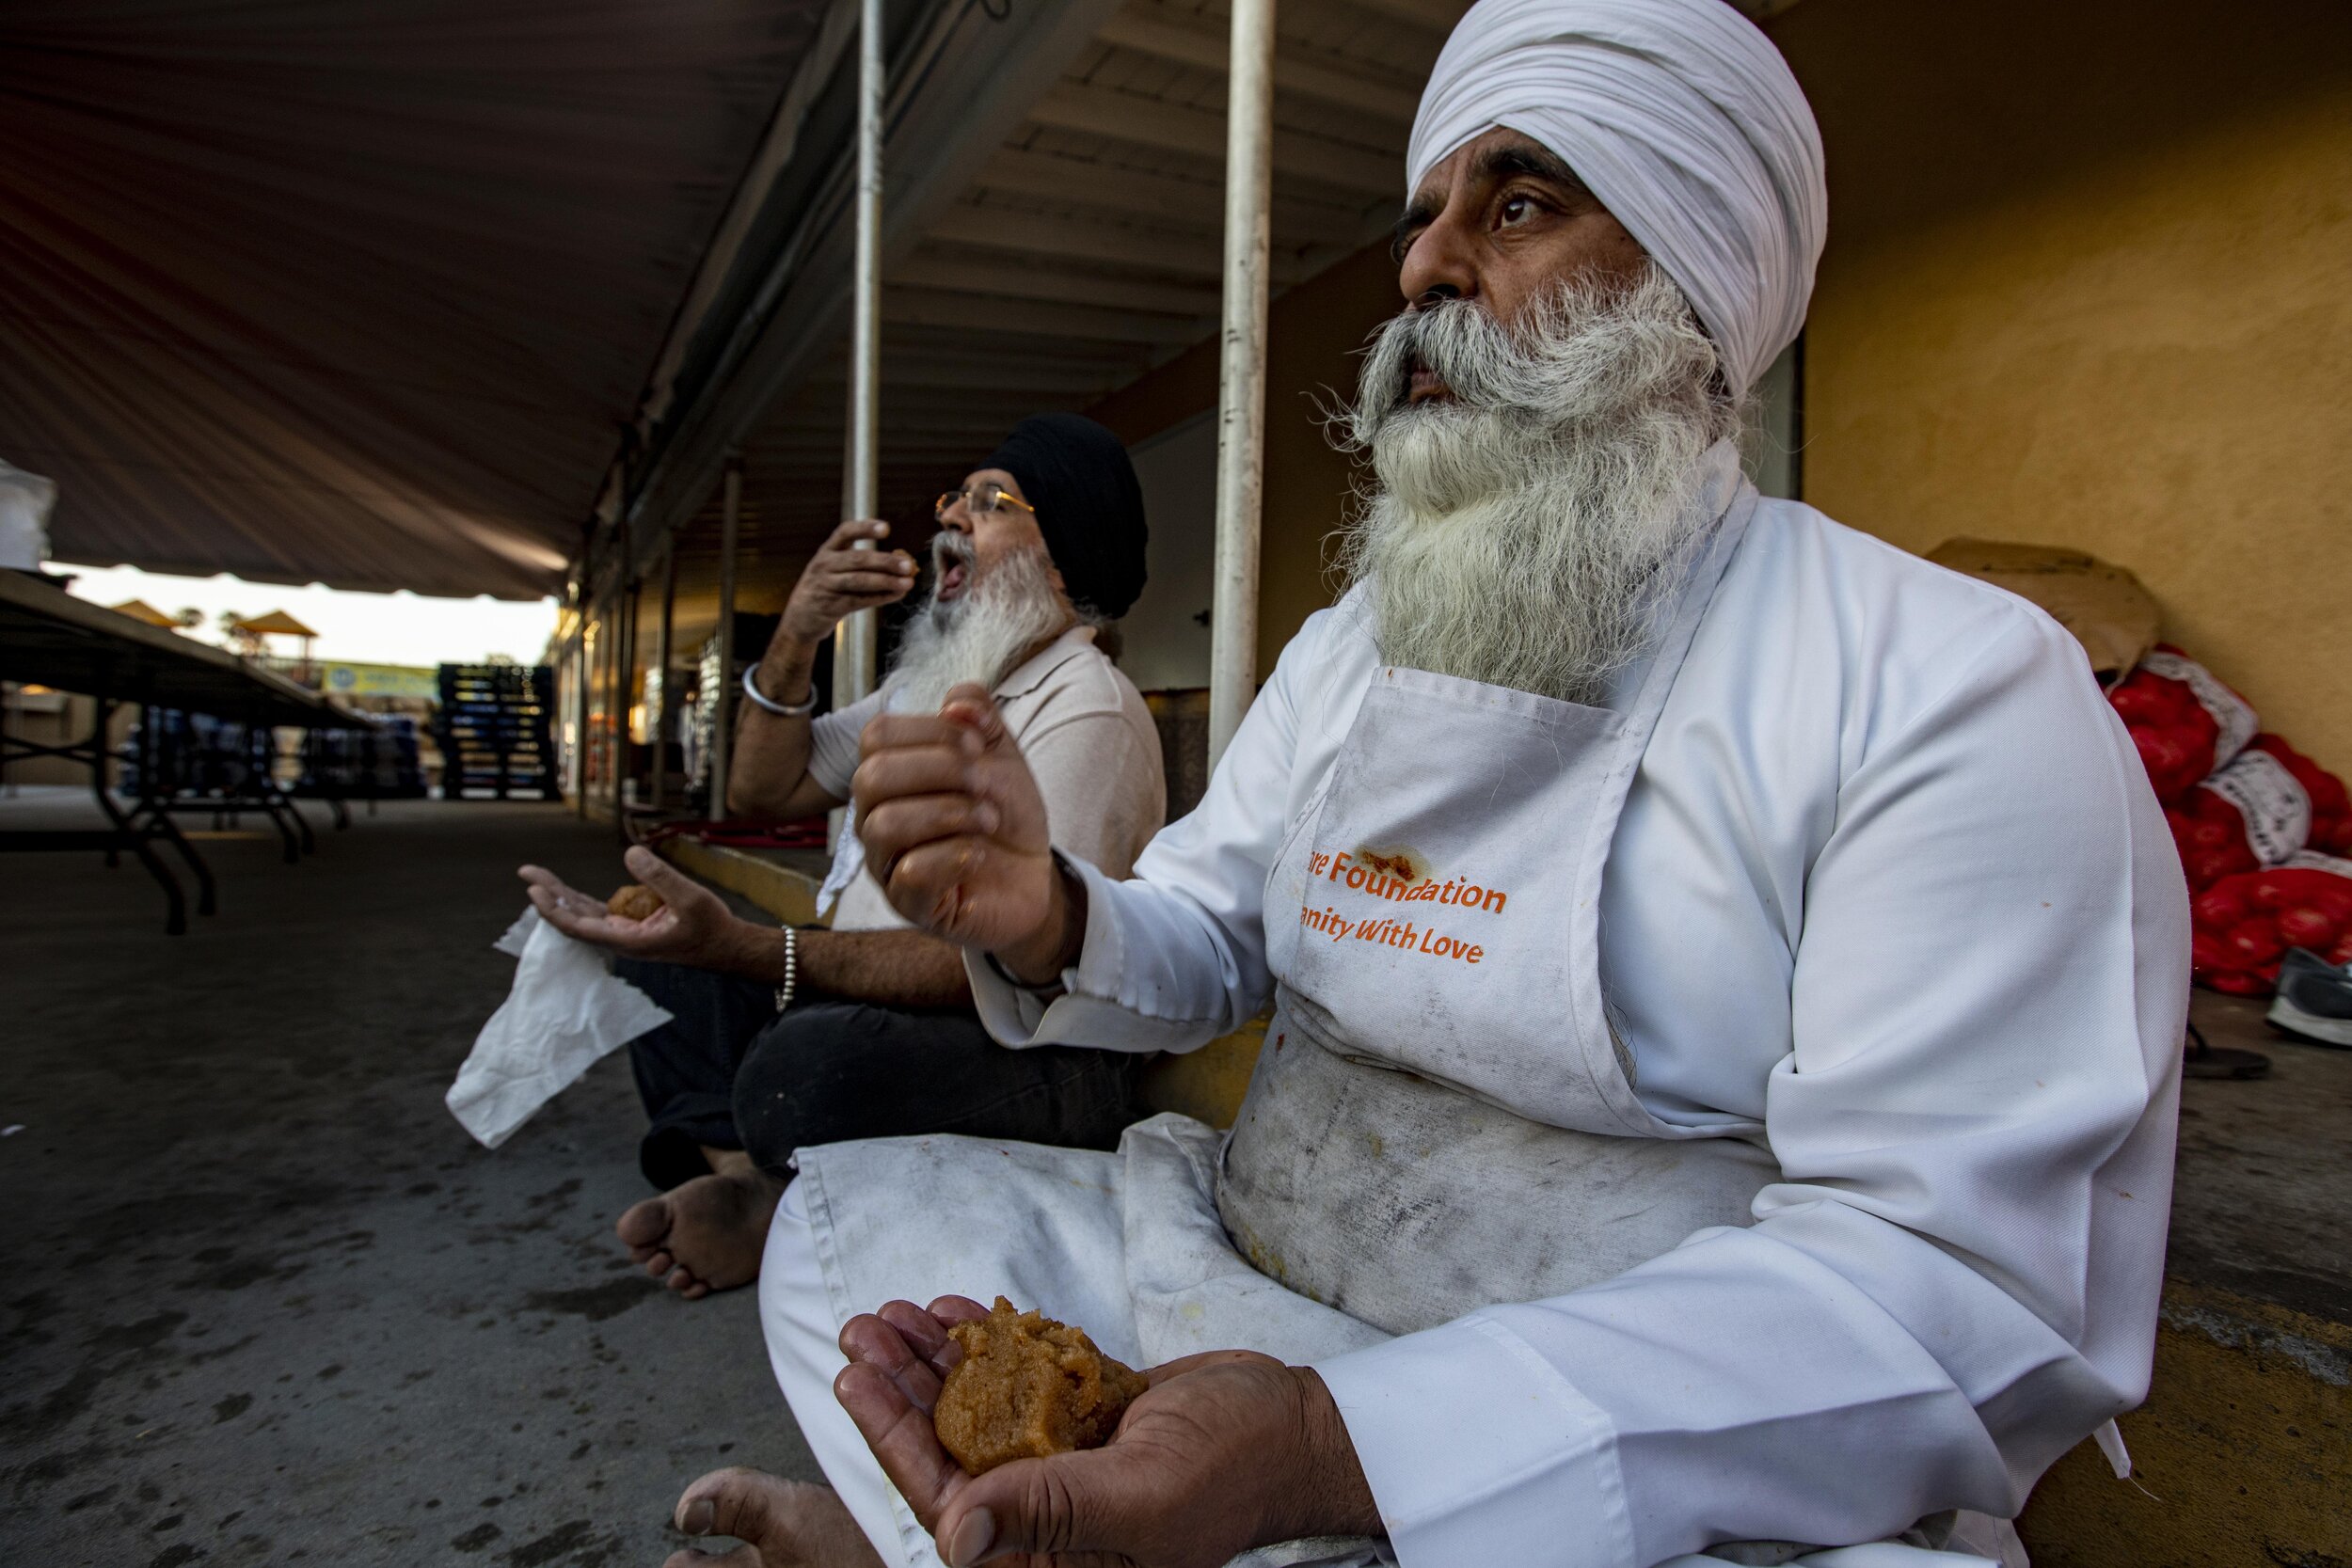  Manjeet Singh eats a traditional Sikh sweet called prashad at Khalsa Care Foundation during a break from preparing meals for the needy. The Sikh tradition is that the desert be eaten by hand sitting on the ground in the gurdwara (temple). The Sikh c